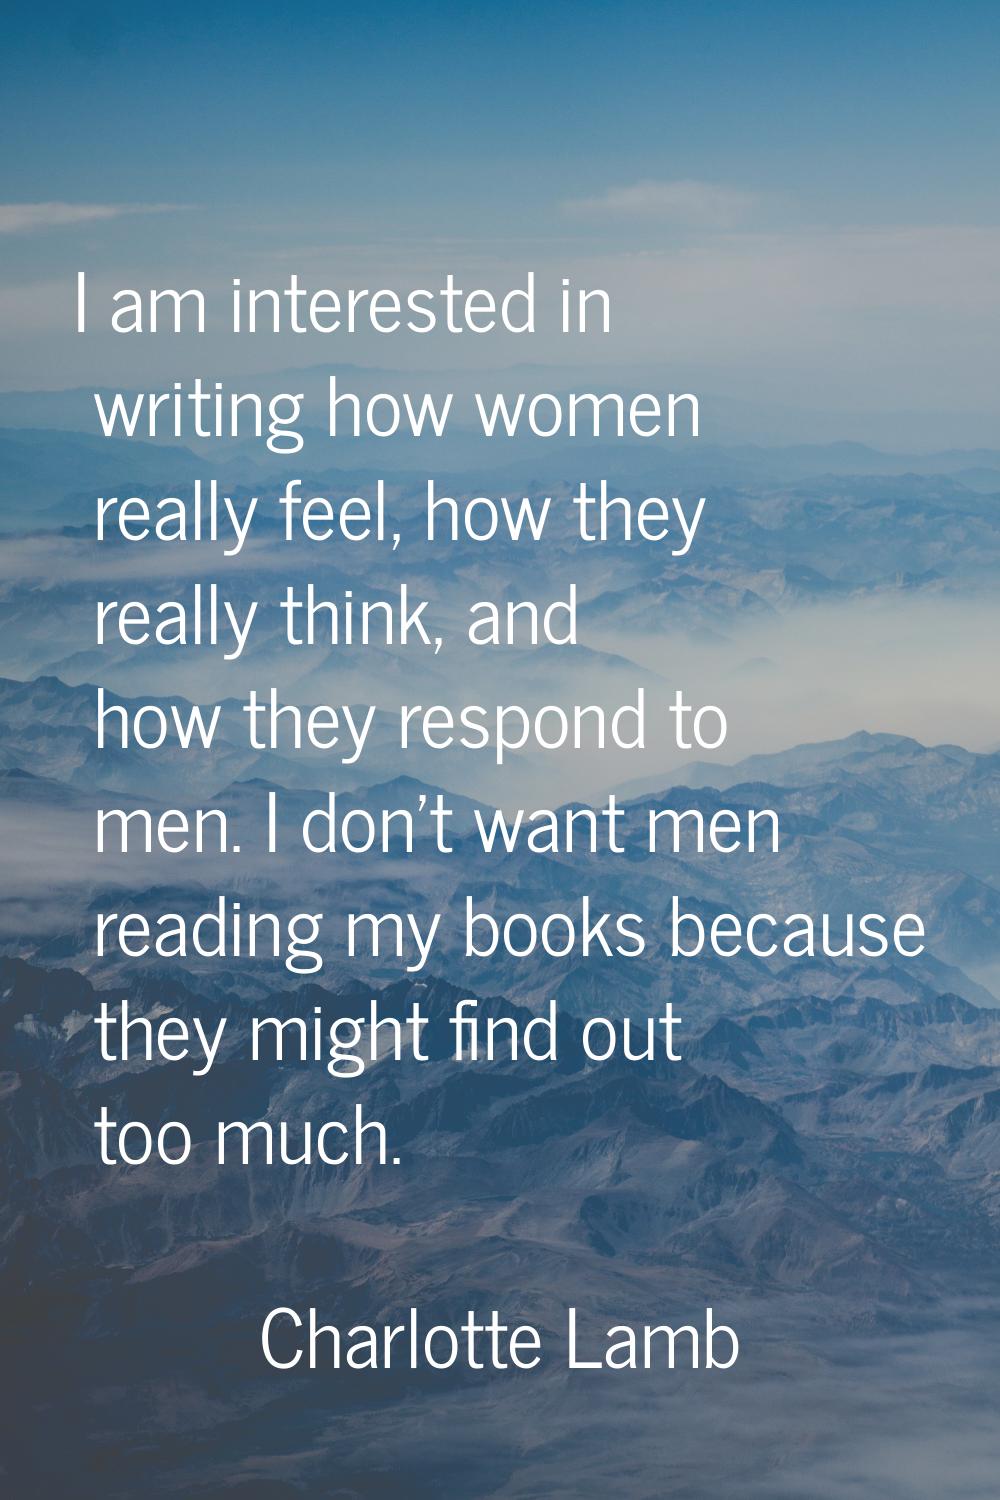 I am interested in writing how women really feel, how they really think, and how they respond to me